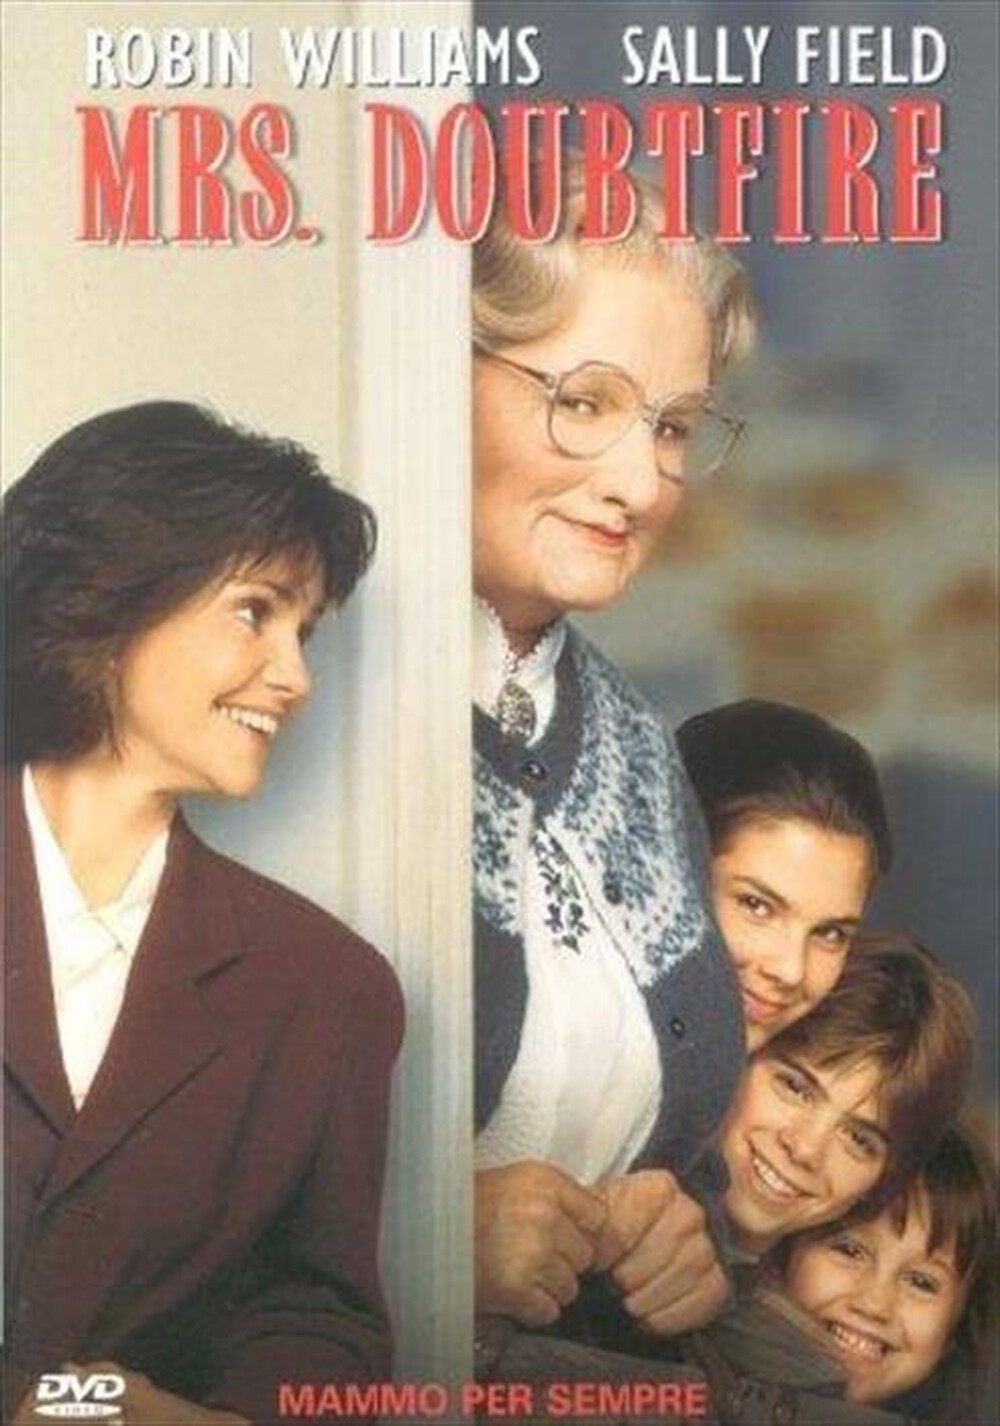 "EAGLE PICTURES - Mrs. Doubtfire"